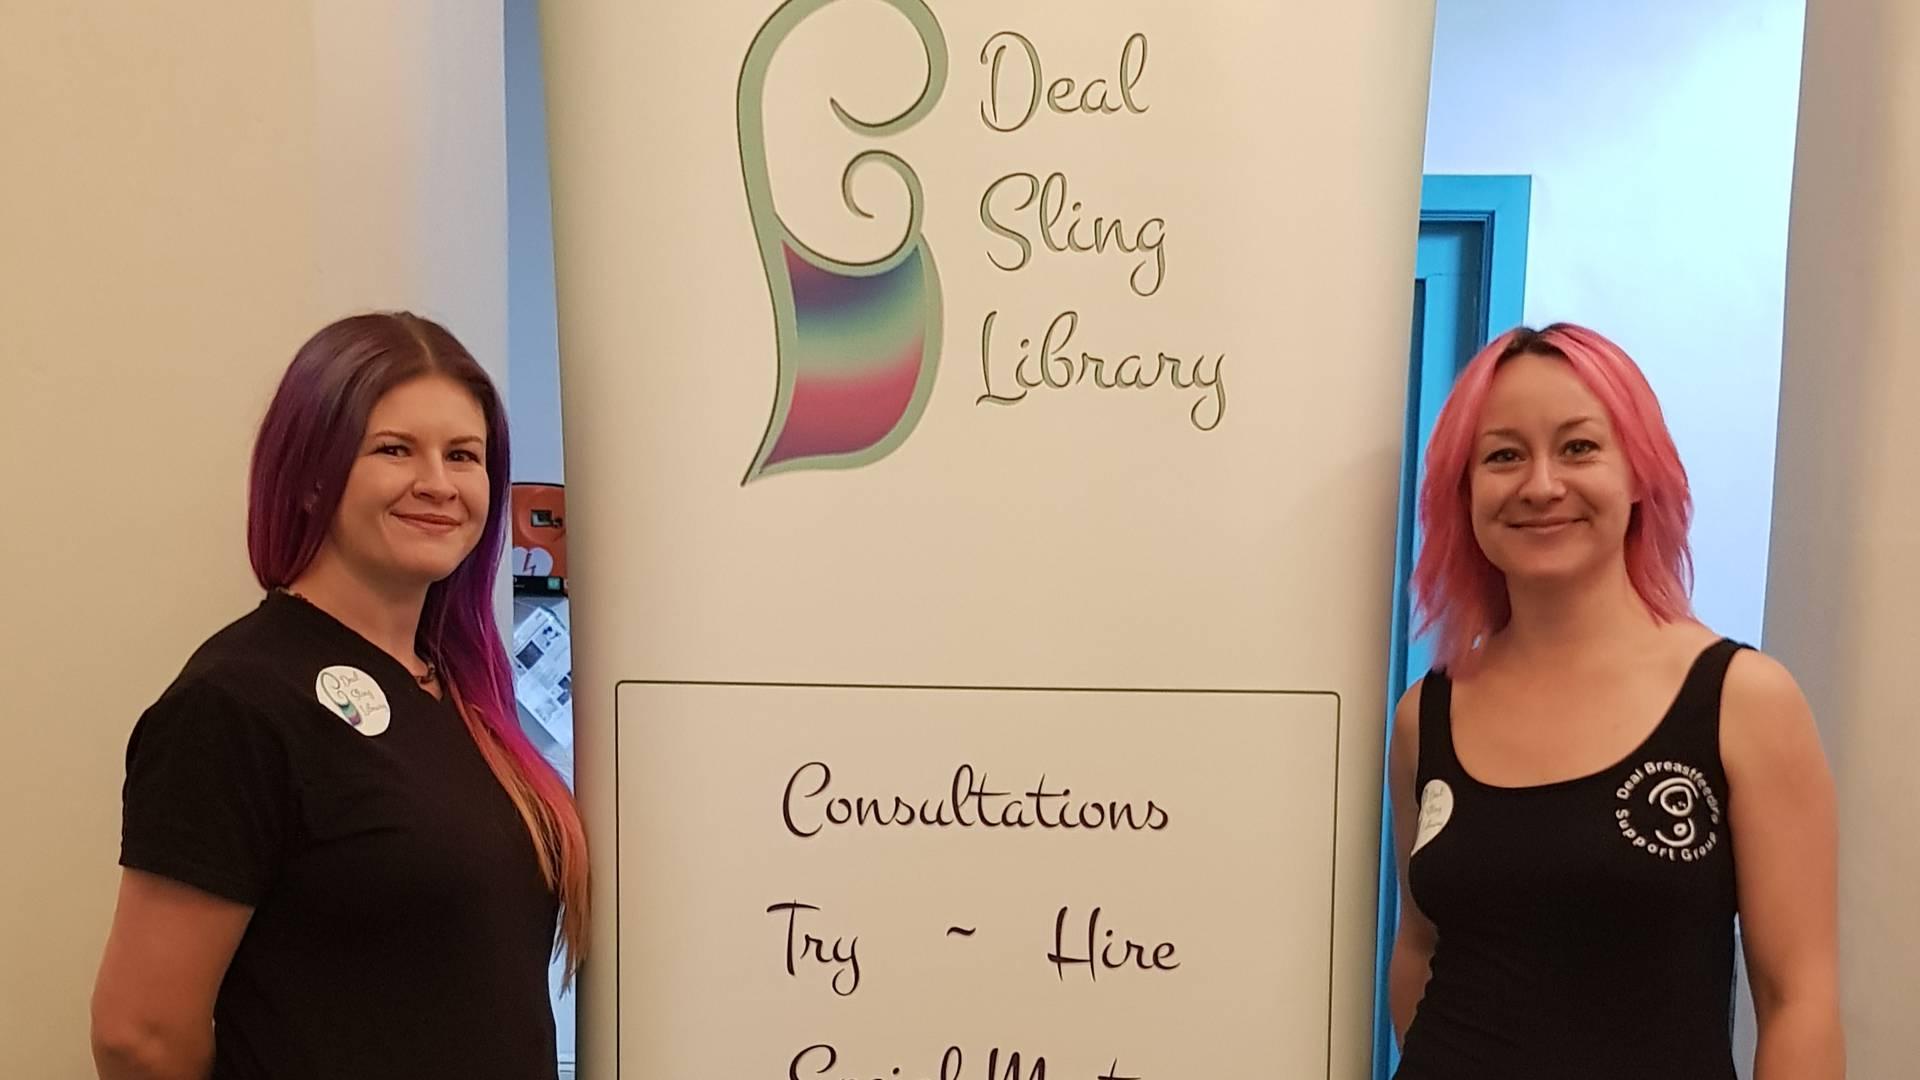 Deal Sling Library photo